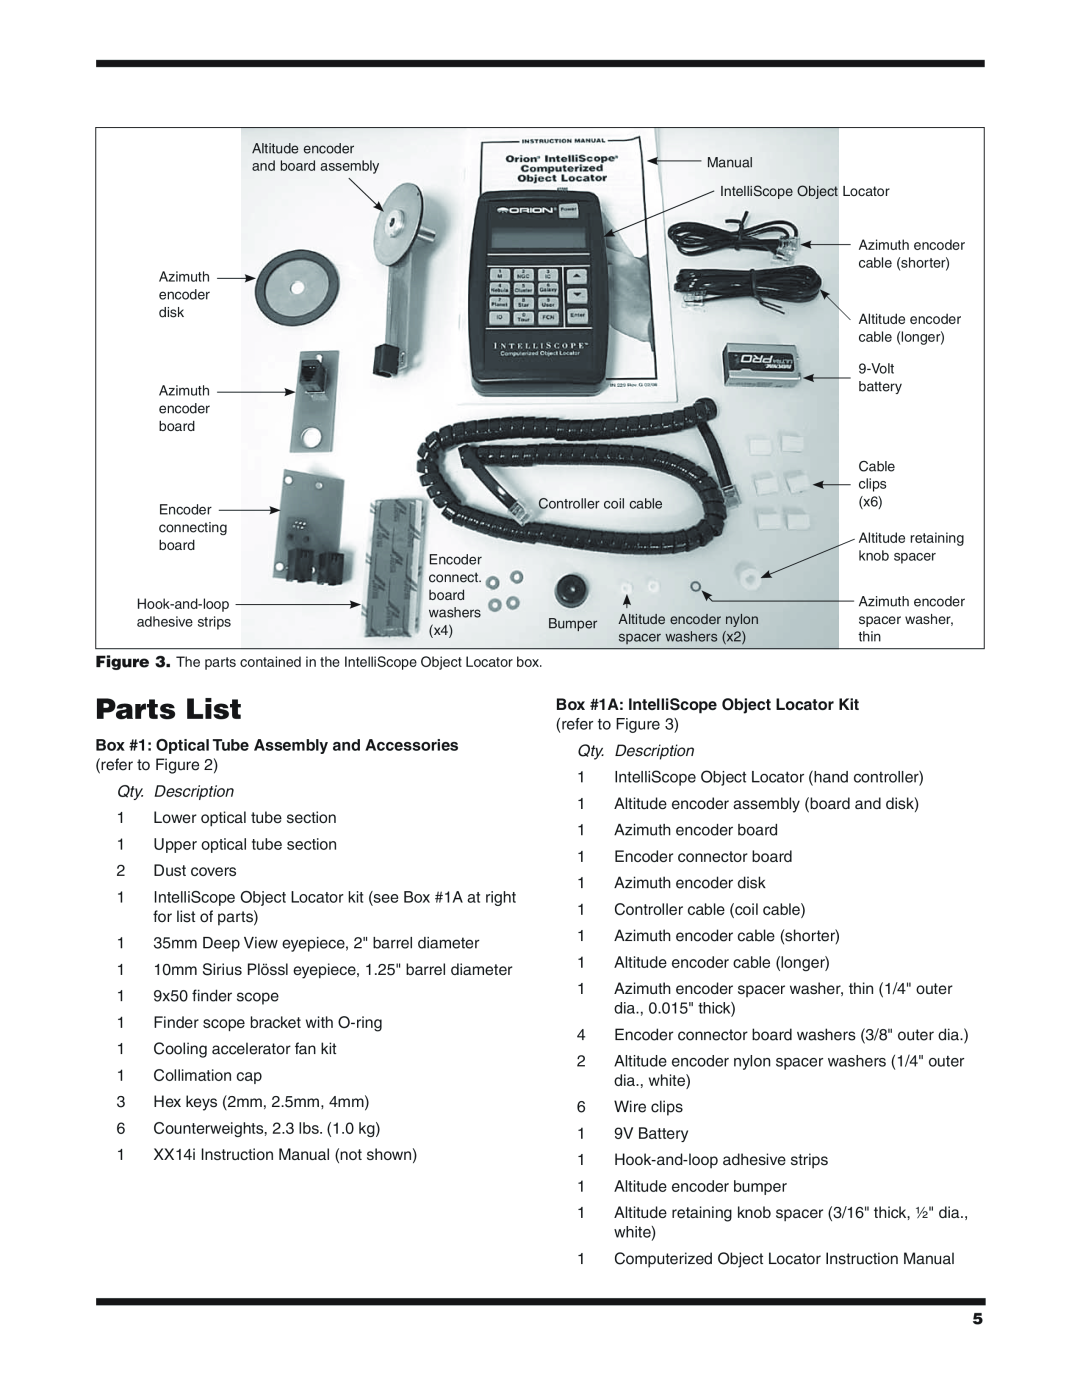 Orion XX14I instruction manual Parts List, Box #1 Optical Tube Assembly and Accessories refer to Figure, Qty. Description 